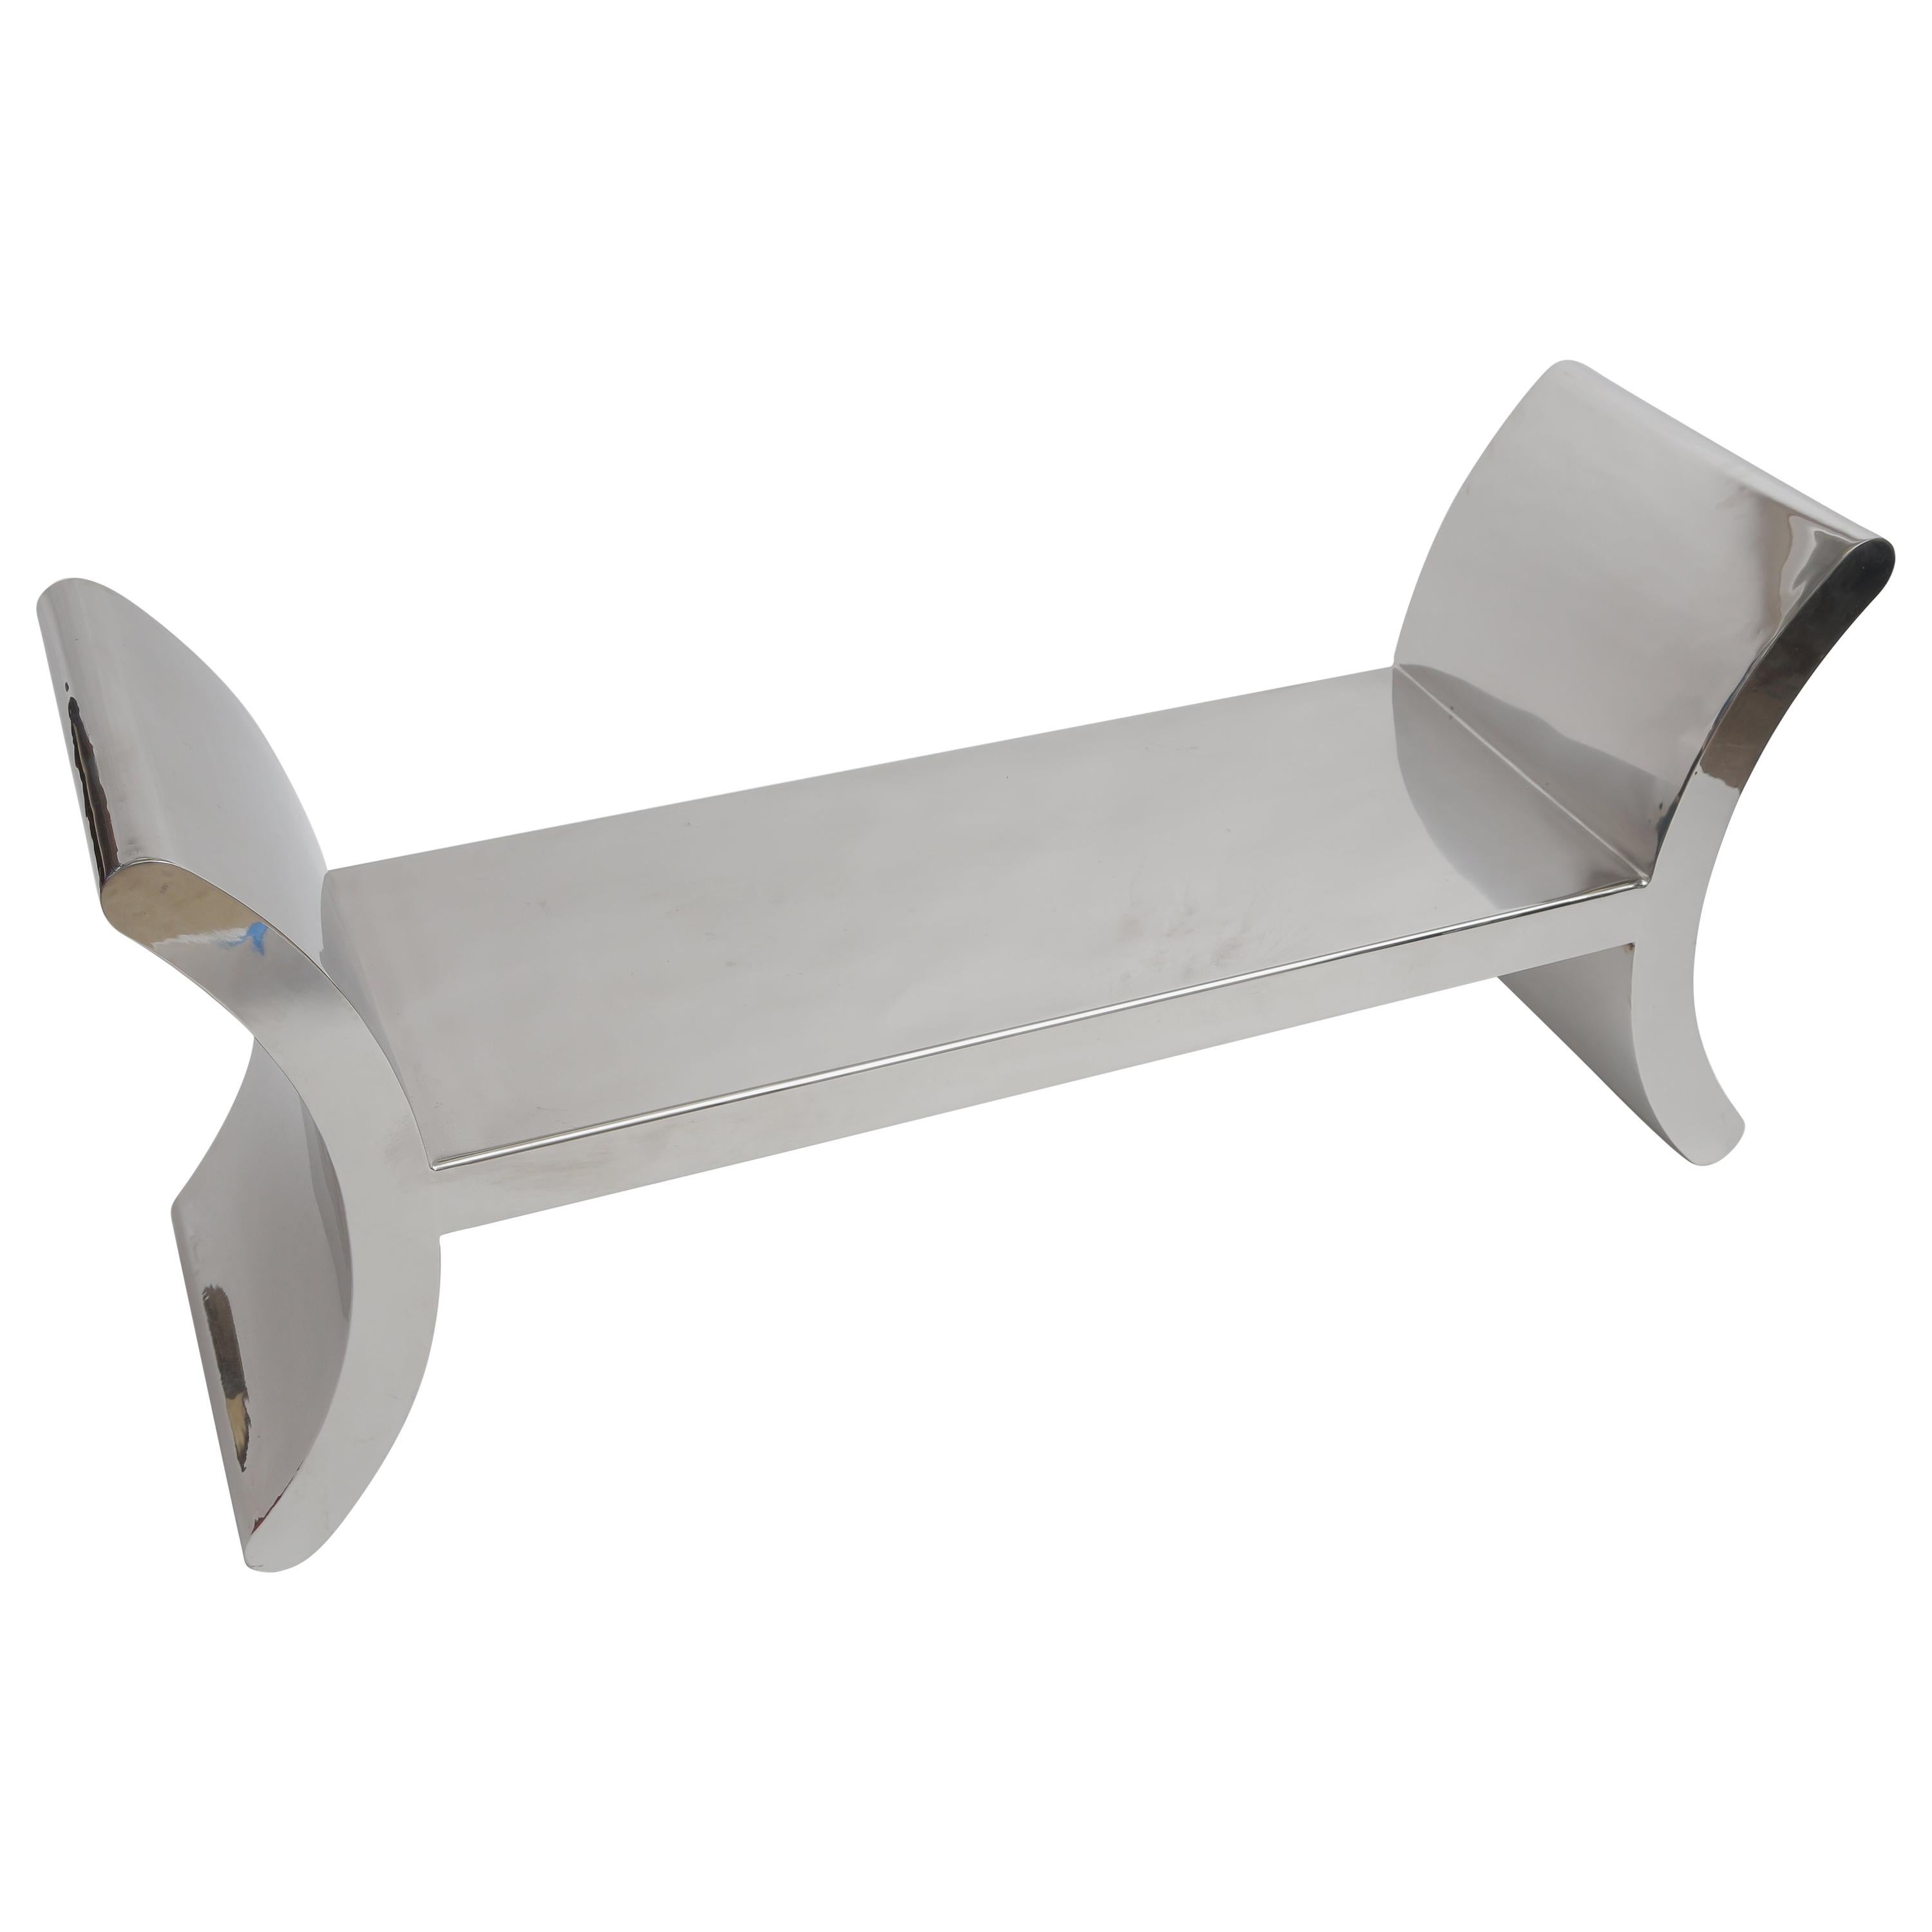 Ron Seff Ramses Bench For Sale